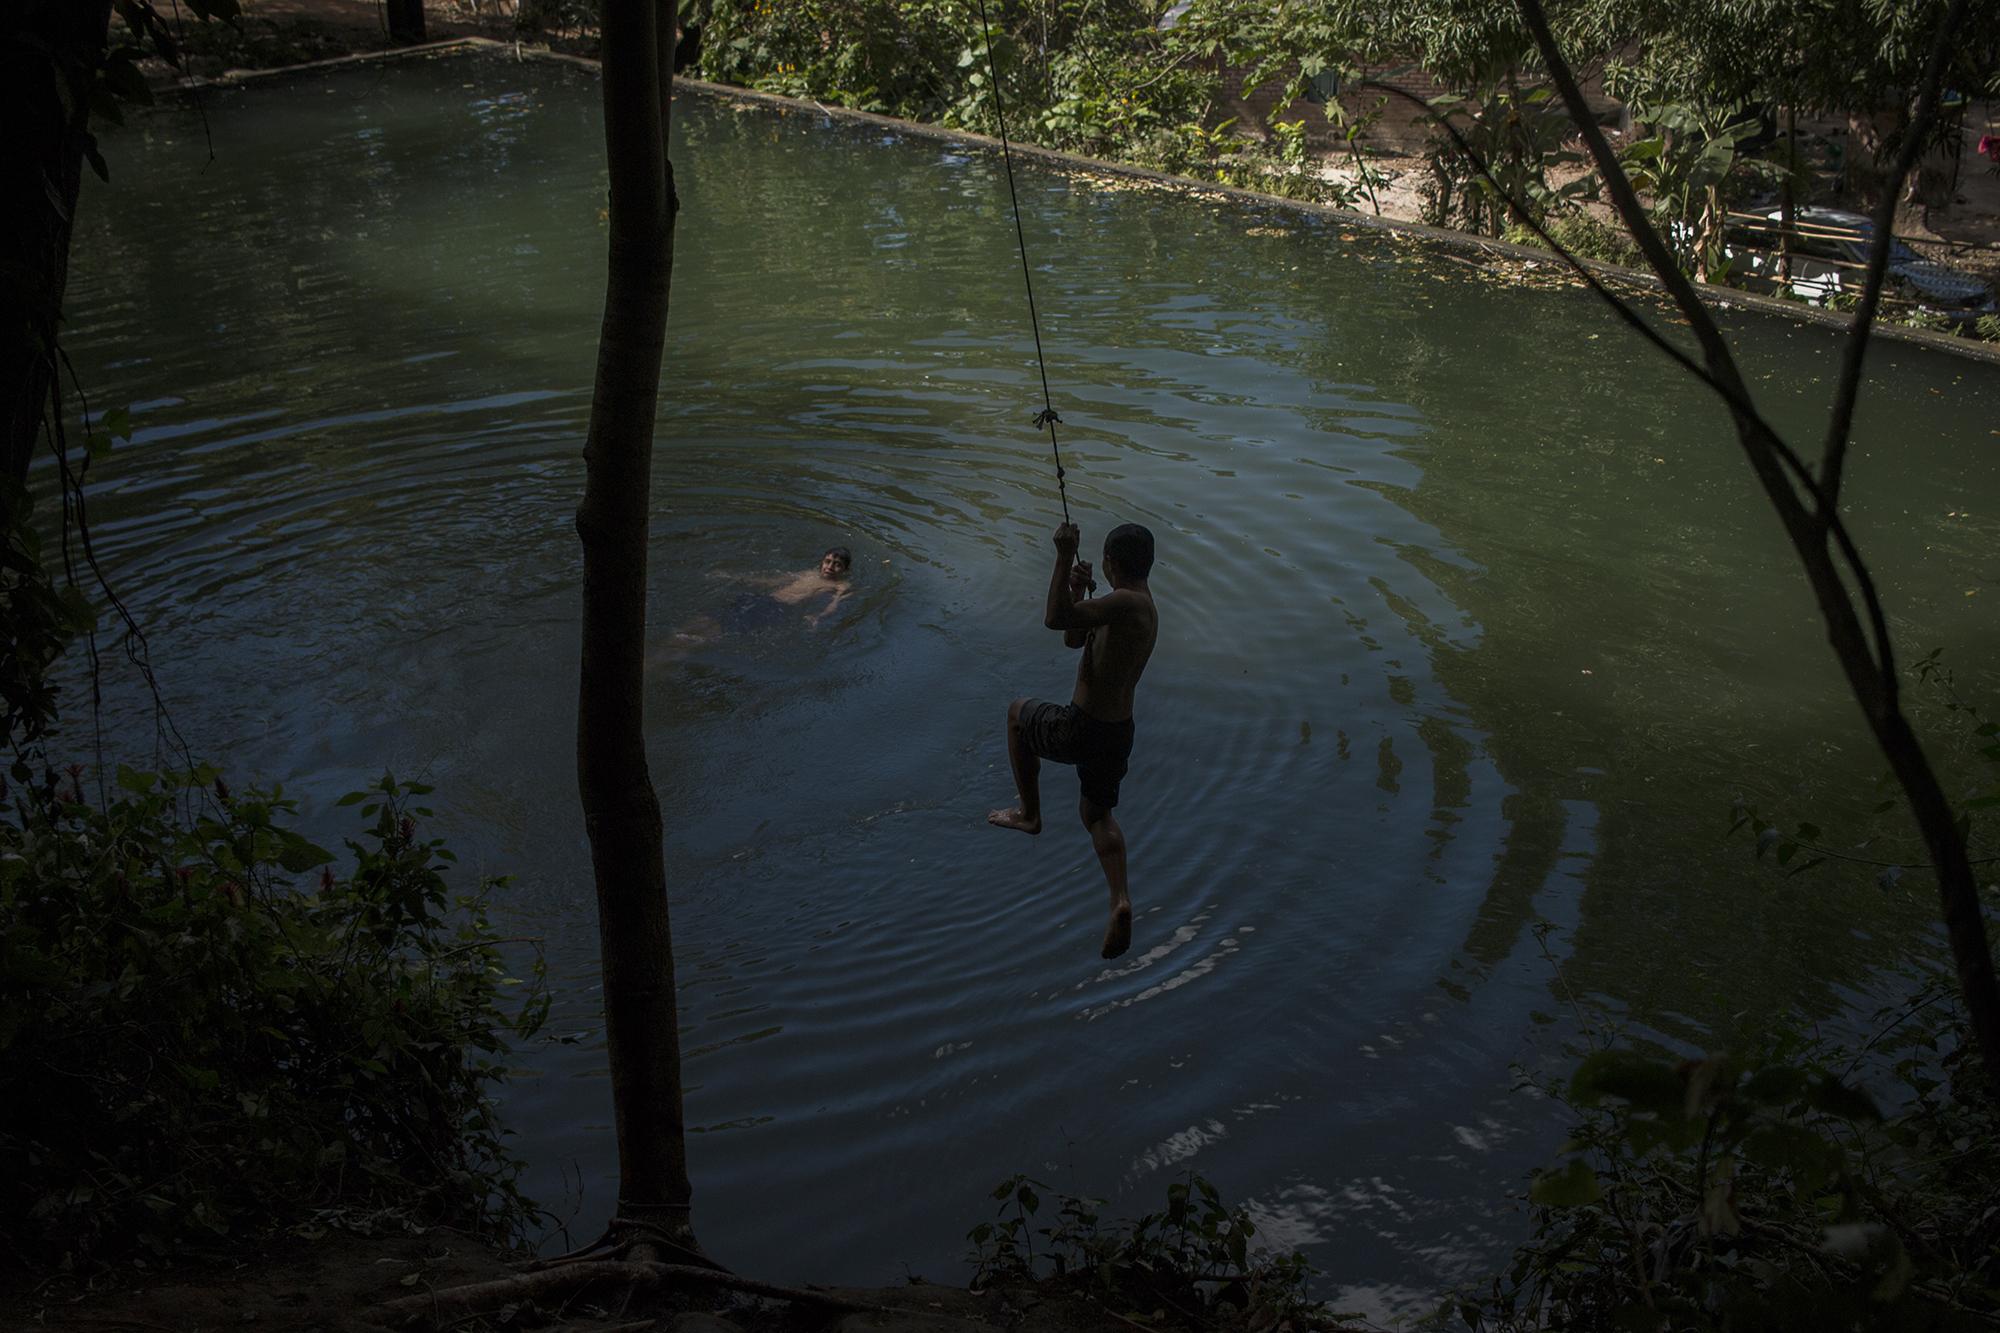 Residents of La Labor take a dip in the spring that supplies more than 10,000 people with water to drink, bathe, and wash clothes. Photo Víctor Peña